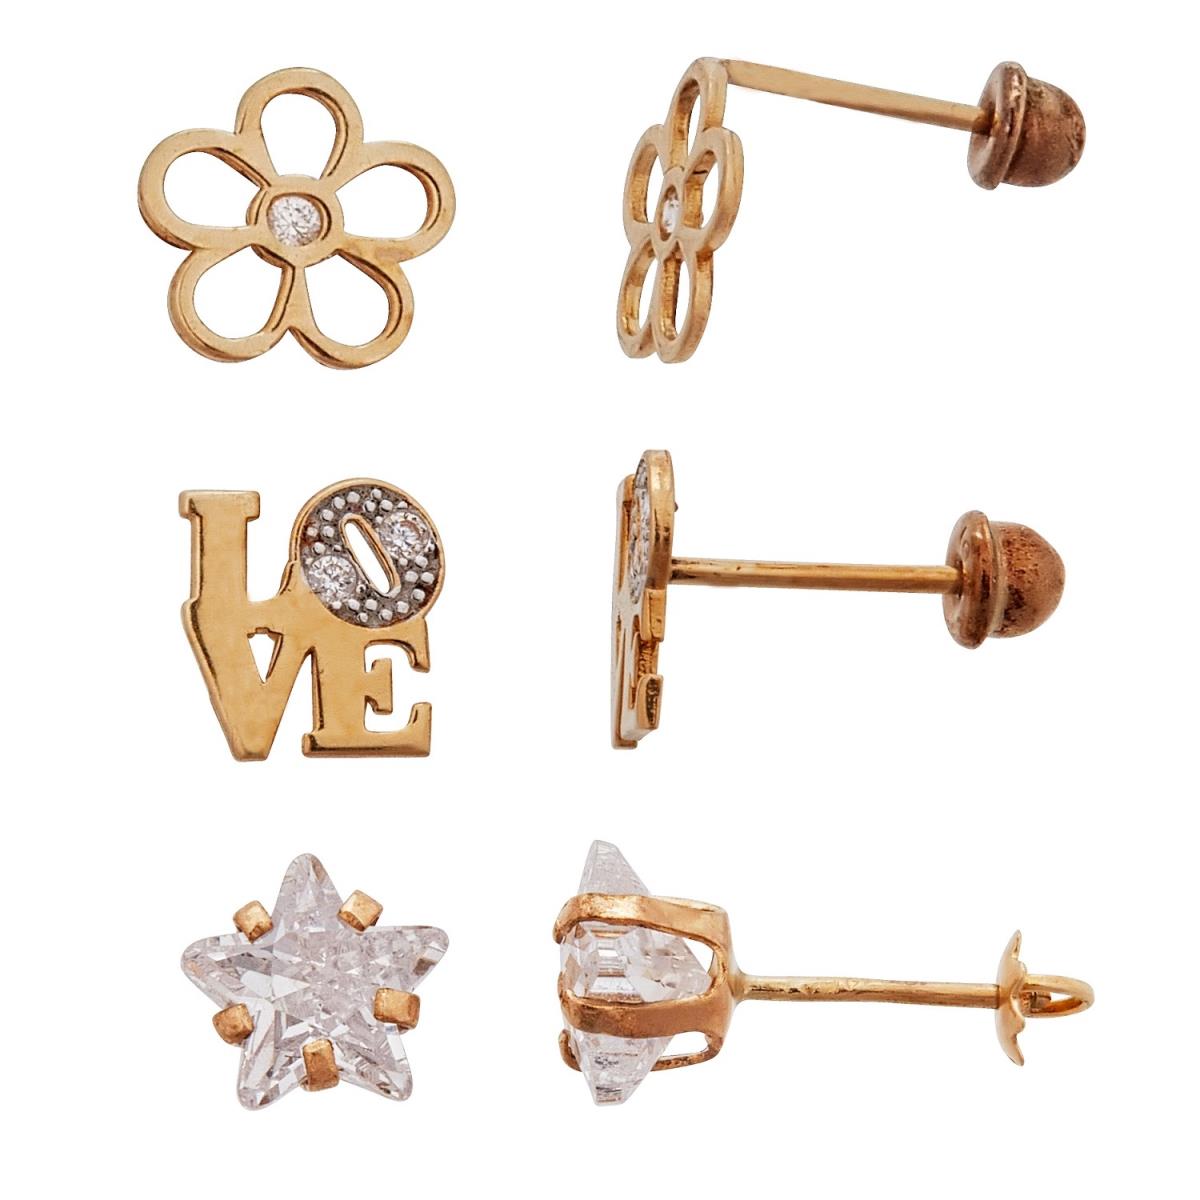 14K Yellow Gold High Polished Flower Silhouette, 14K Two-Tone High Polished LOVE, 14K Star Solitaire Screw Back Stud Earring Set